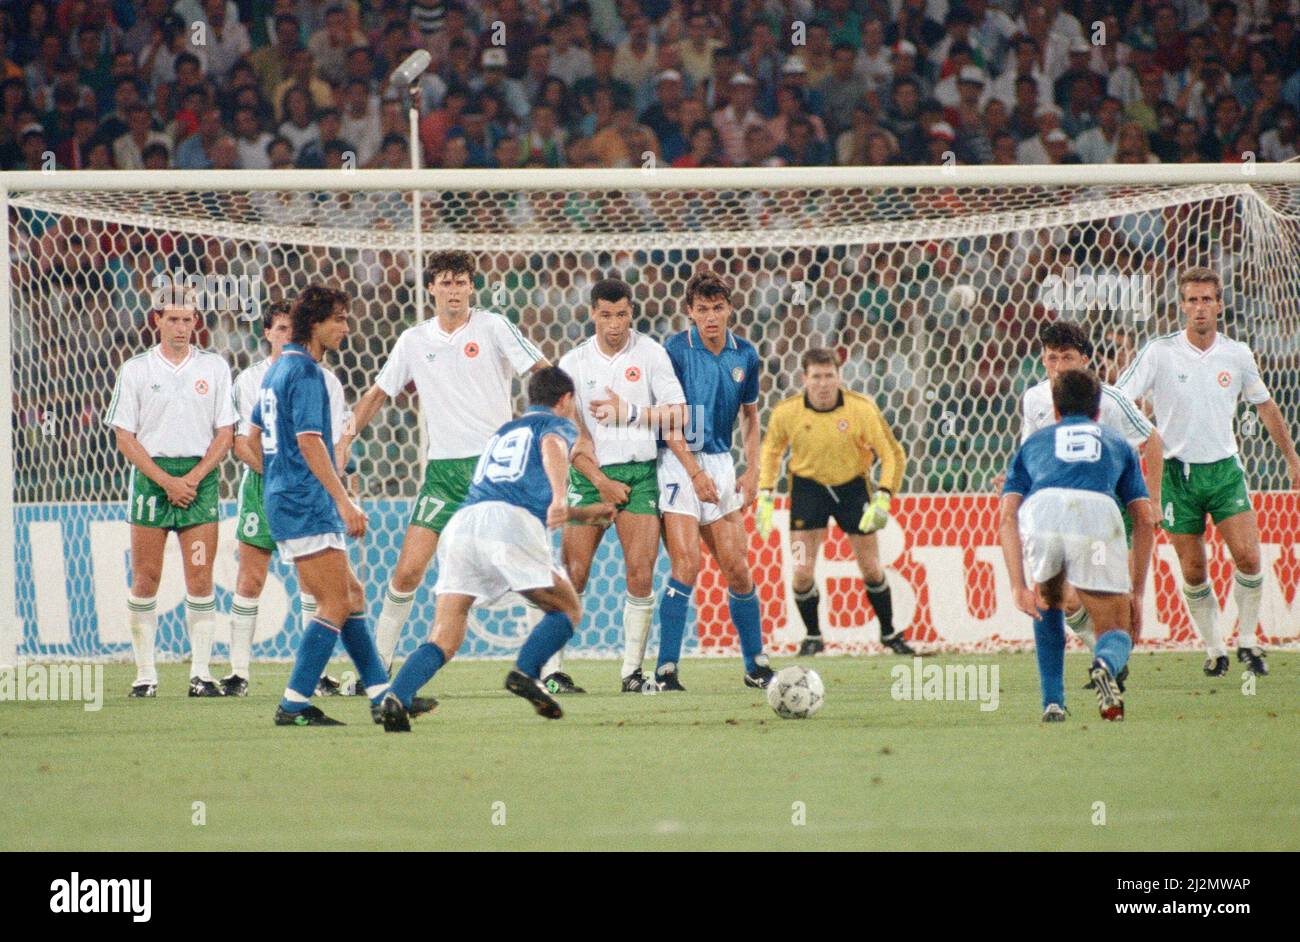 1990 World Cup Quarter Final at the Stadio Olimpico in  Rome, Italy. Republic of Ireland 0 v Italy 1. Free kick for Italy taken by Salvatore Schillaci as Irish defenders form a wall watched by goalkeeper Pat Bonner. 30th June 1990. Stock Photo